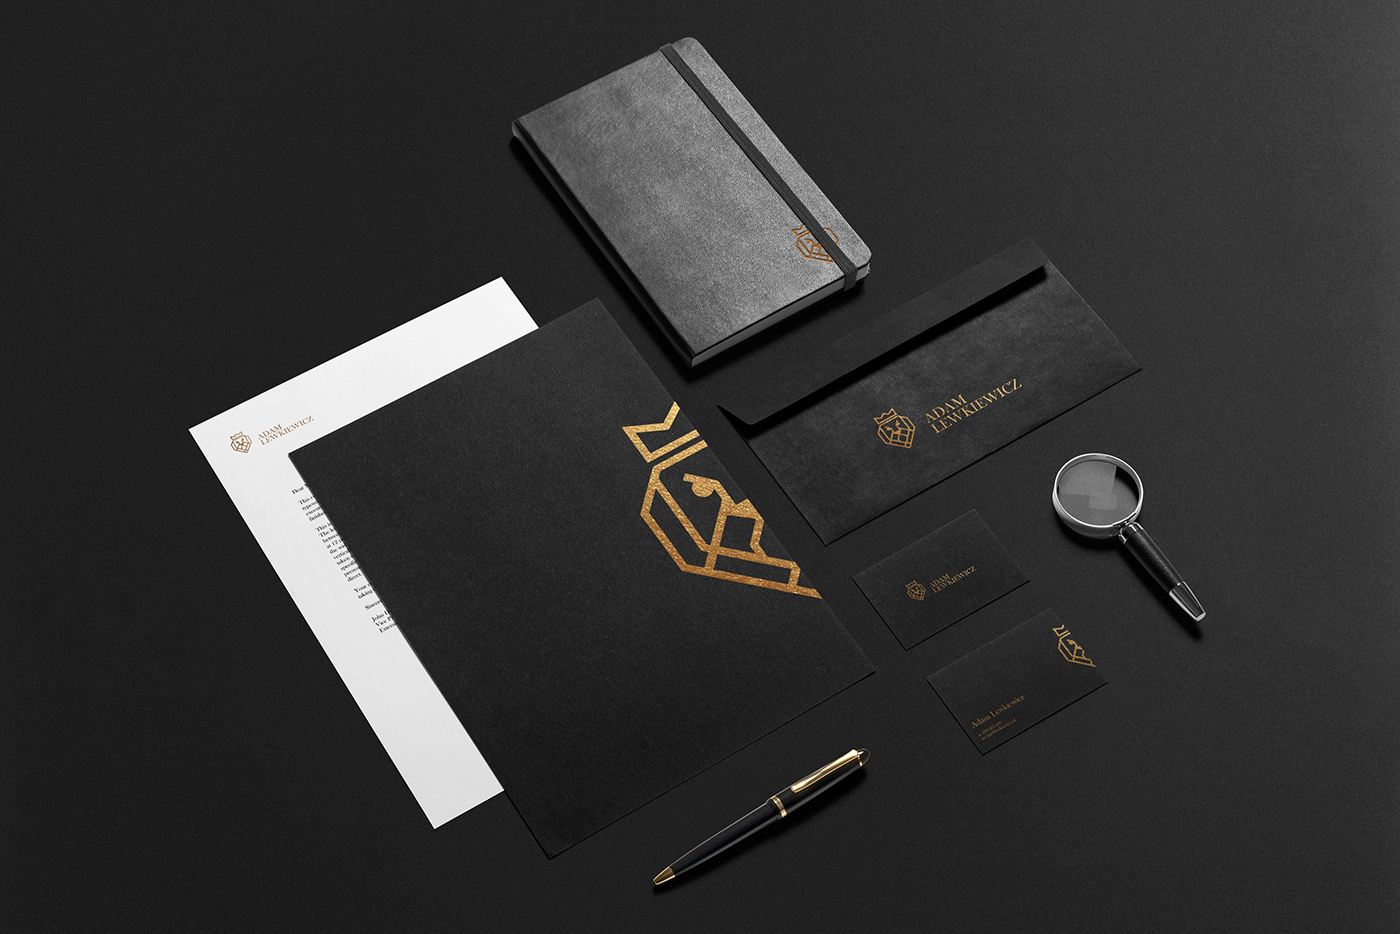 lawyer brand law judge gold letterpress hotstamping firm company